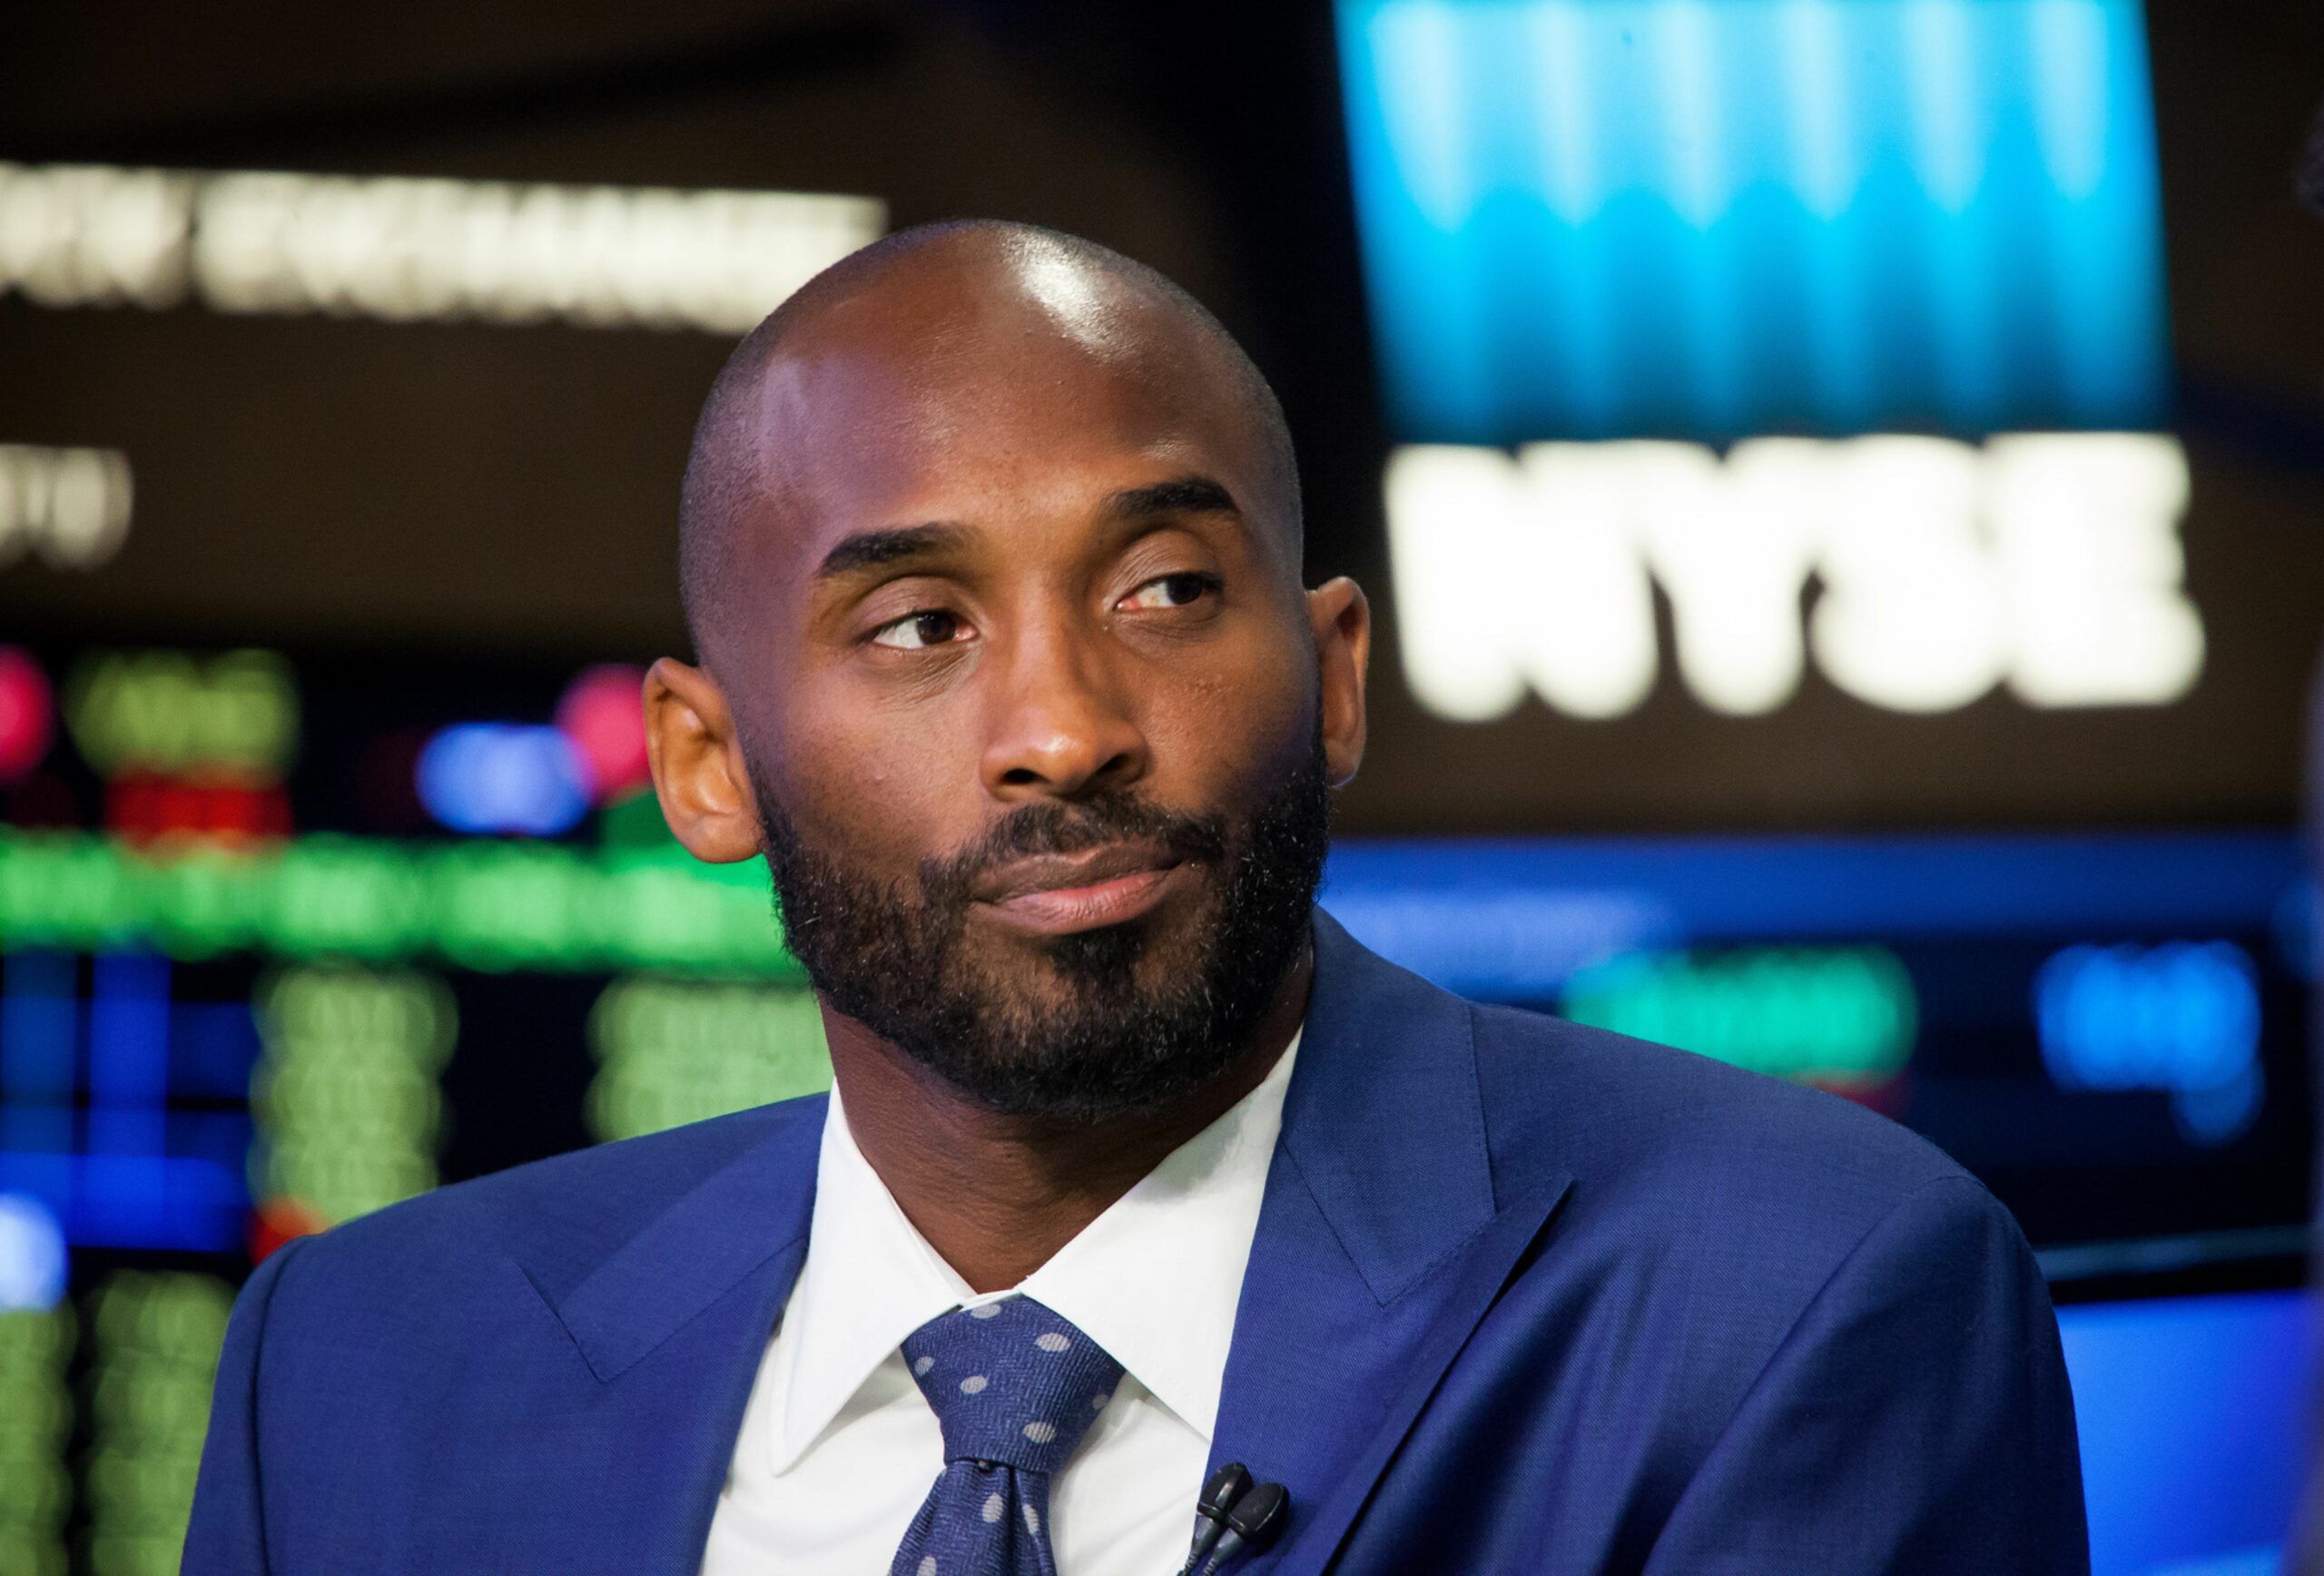 Kobe Bryant, former National Basketball Association (NBA) player, listens during an interview after unveiling his venture-capital fund Bryant Stibel on the floor of the New York Stock Exchange (NYSE) in New York, U.S., on Monday, Aug. 22, 2016. U.S. stocks fluctuated after erasing an early slide, as a rally in drugmakers spurred by deal activity offset declines in commodity shares led by falling crude-oil prices. Photographer: Michael Nagle/Bloomberg